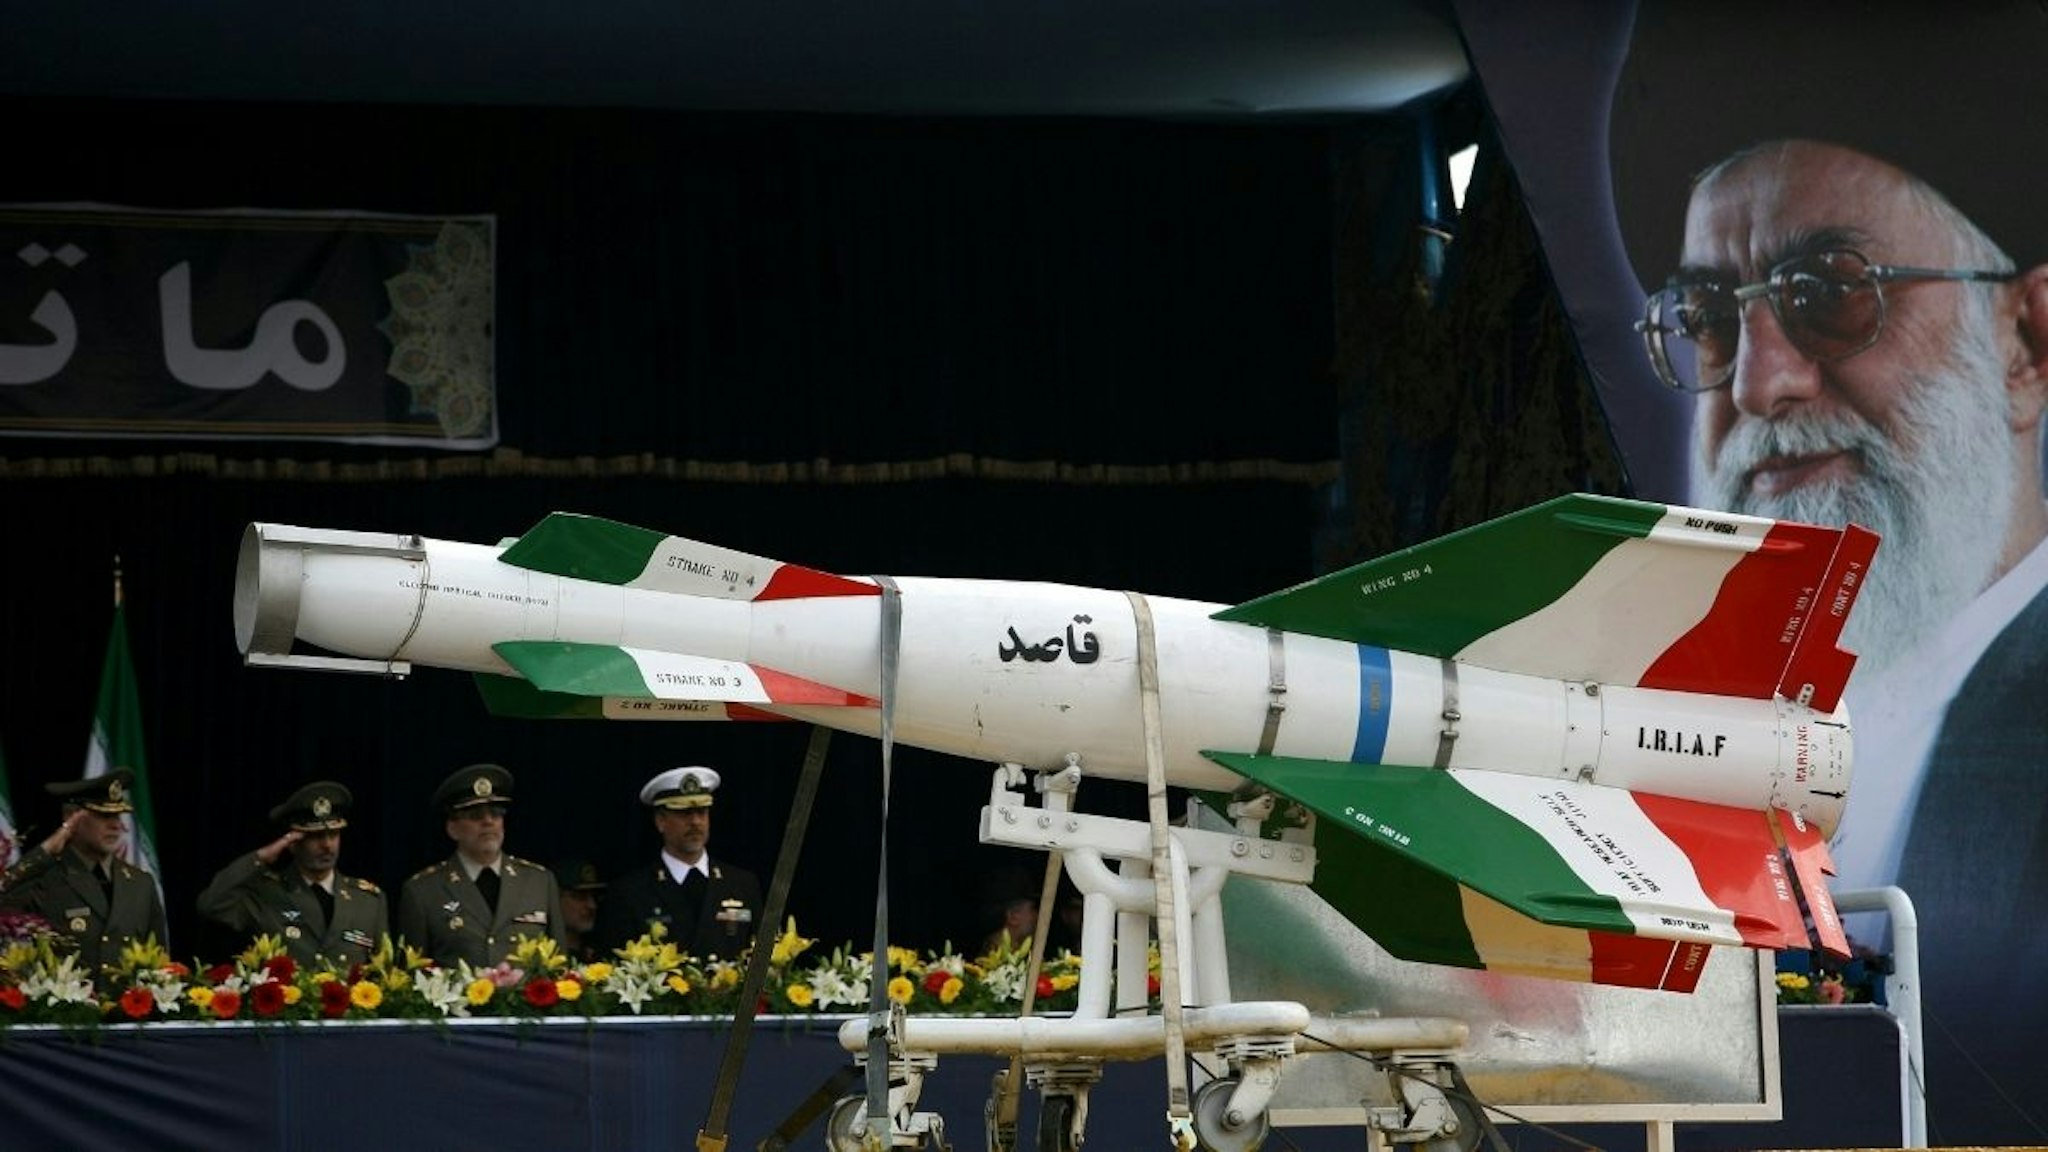 An Iranian surface to surface Ghasedak missile is driven past portraits of Iran's late founder of the Islamic Republic, Ayatollah Ali khamenei (R), during the annual army day military parade on April 17, 2008 in Tehran, Iran.